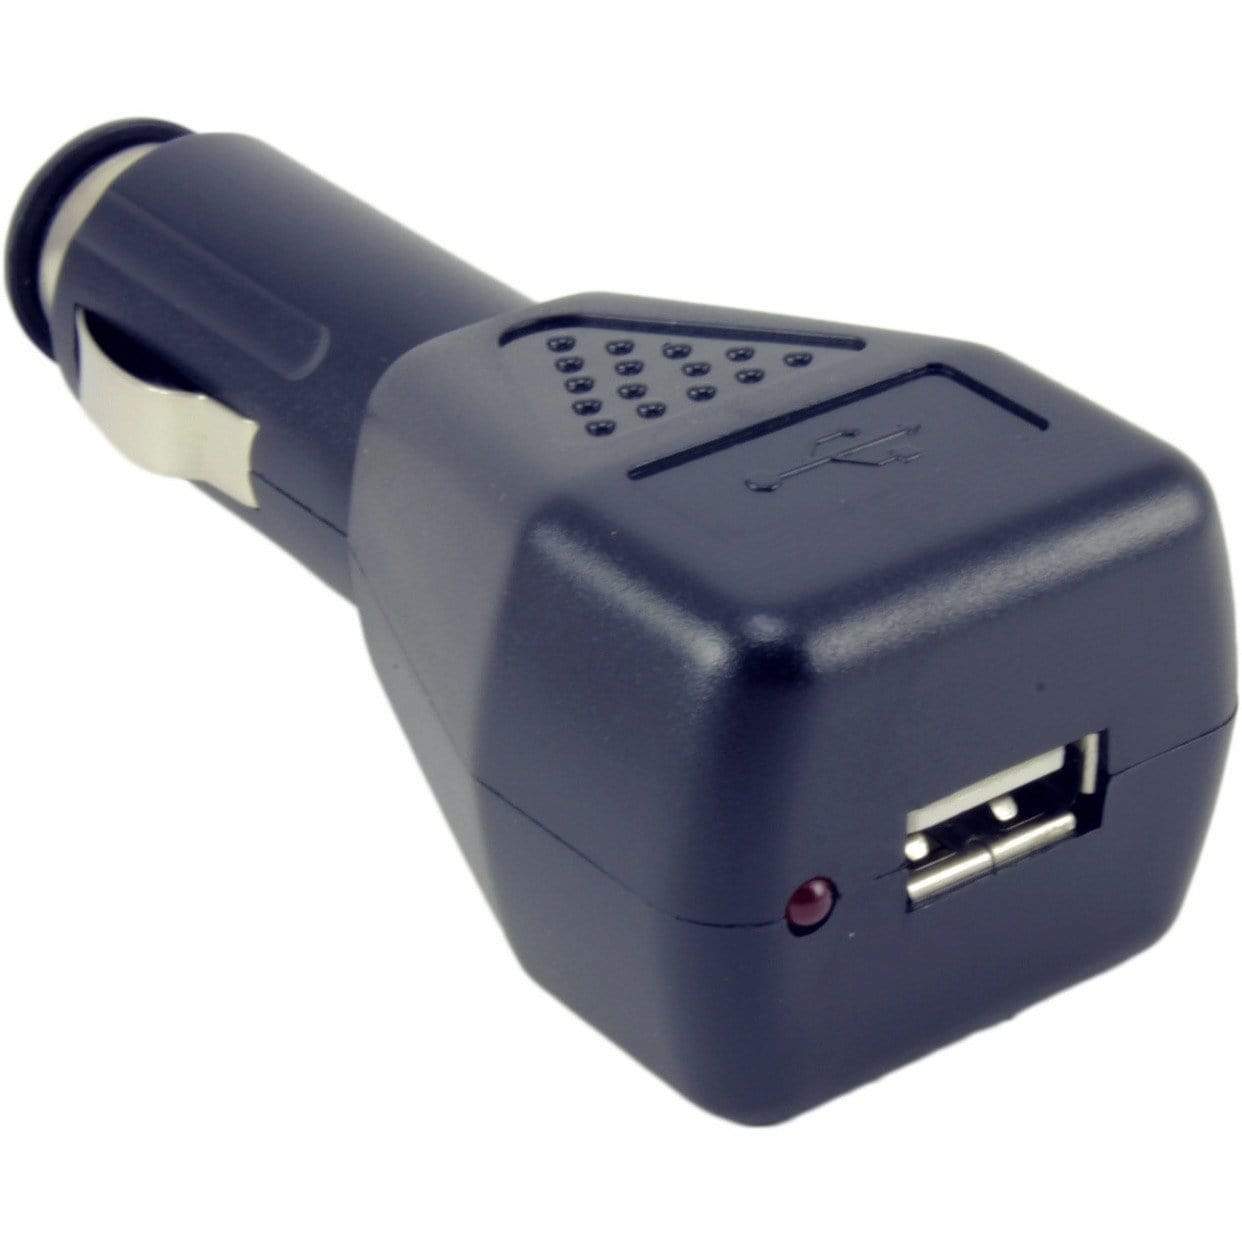 DC USB Car Adapter Default Chargers